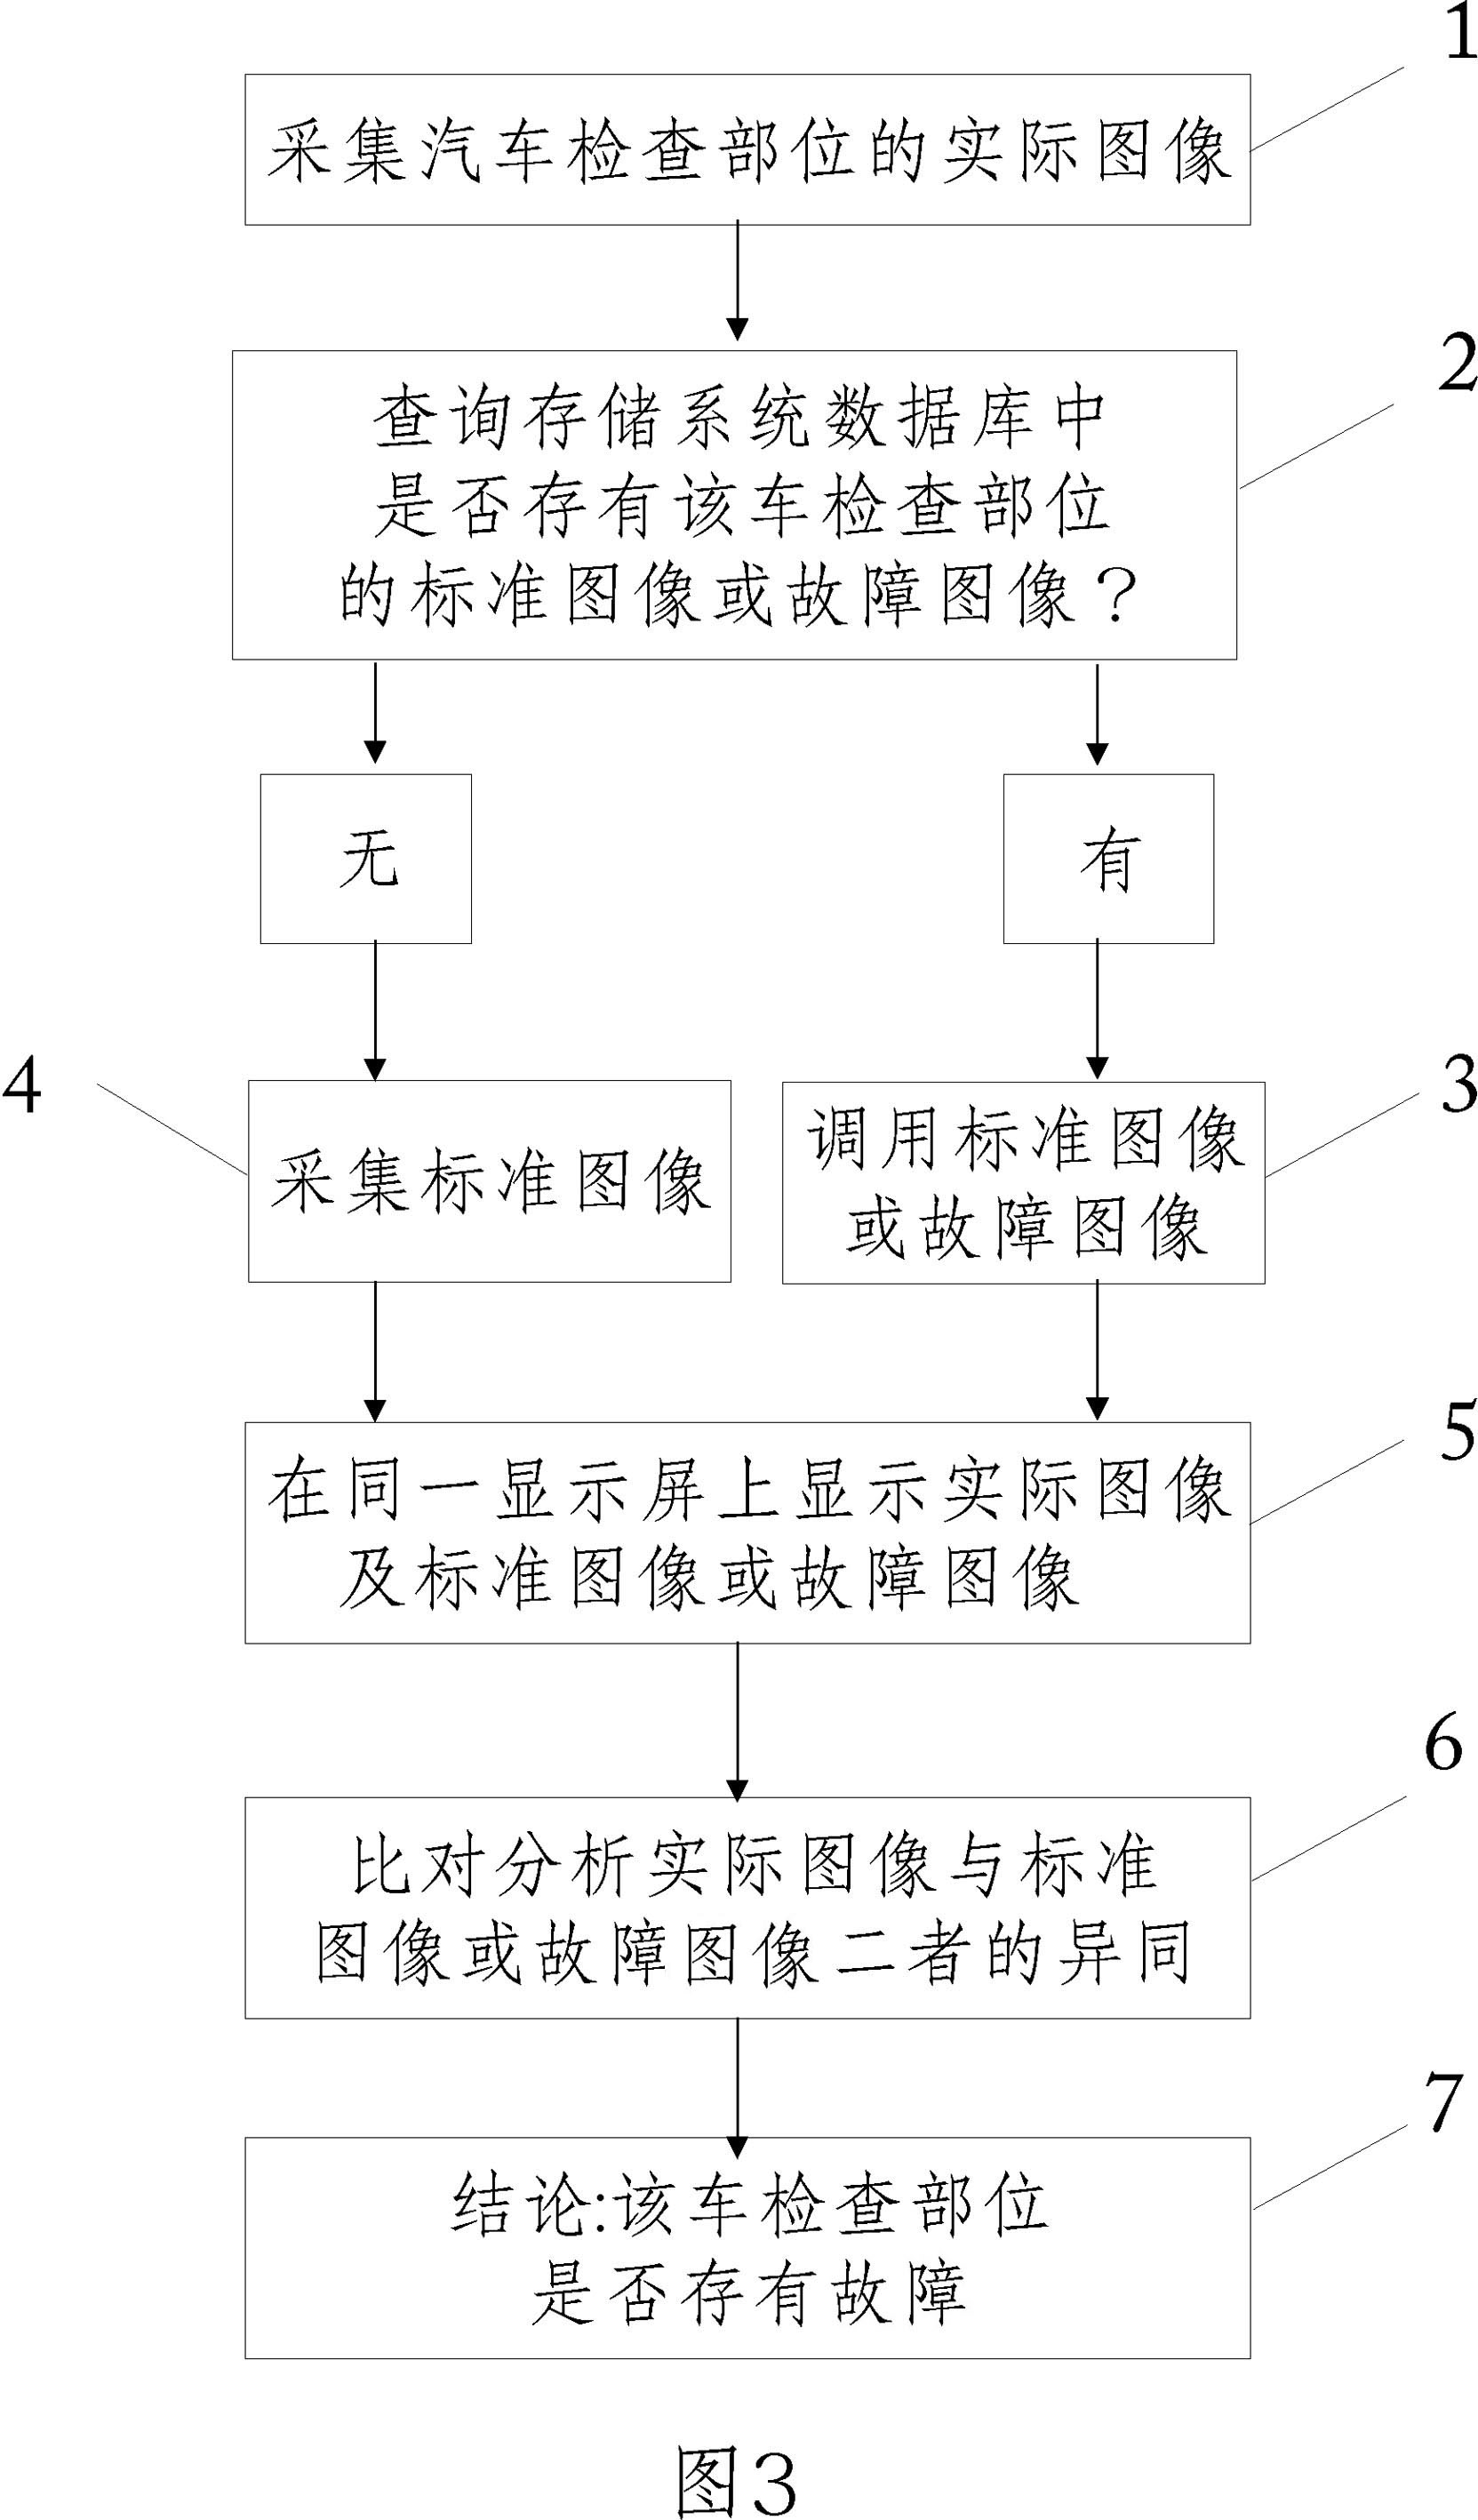 Vehicle failure endoscopic diagnostic system and method